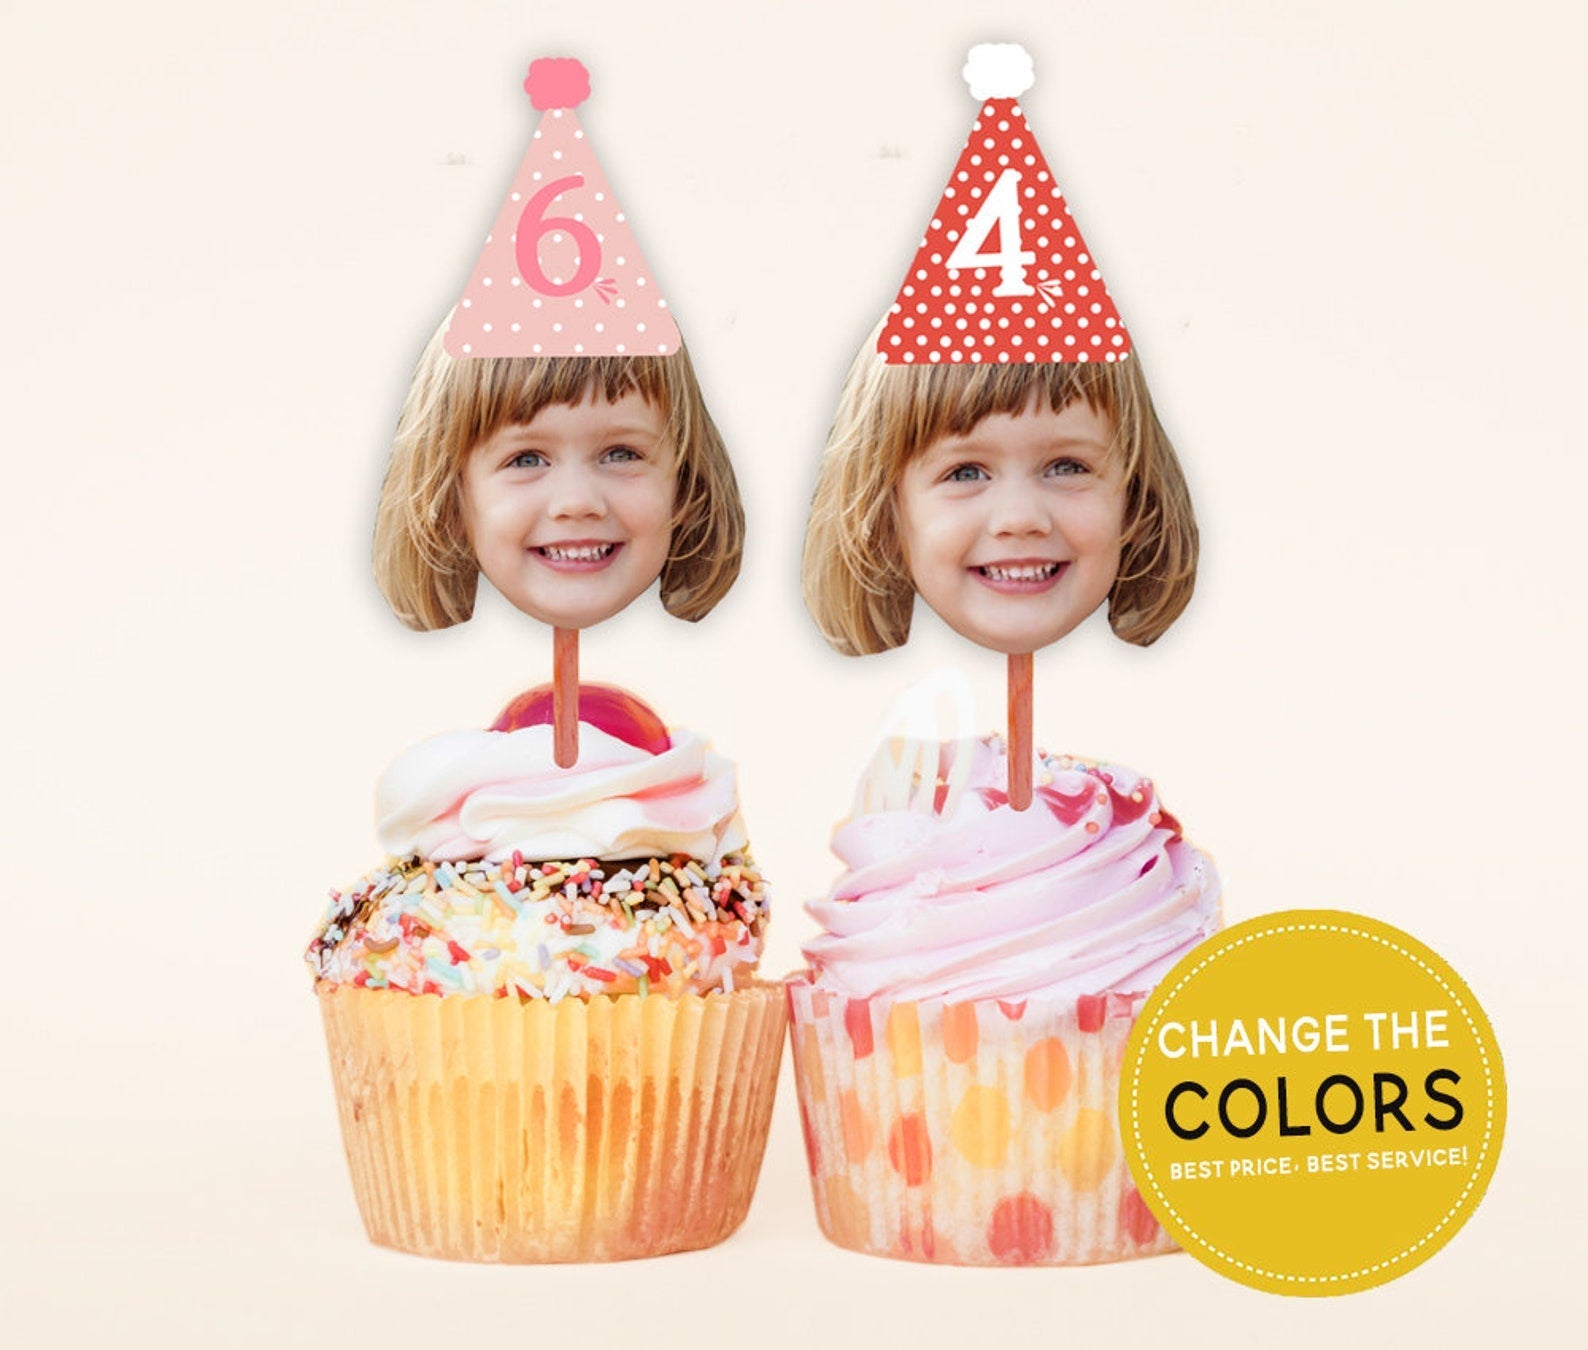 Cupcake Toppers Birthday, Cupcake Toppers Face, Birthday Cake Topper, Photo Cupcake Toppers Birthday, Kids Party Favors, DIGITAL